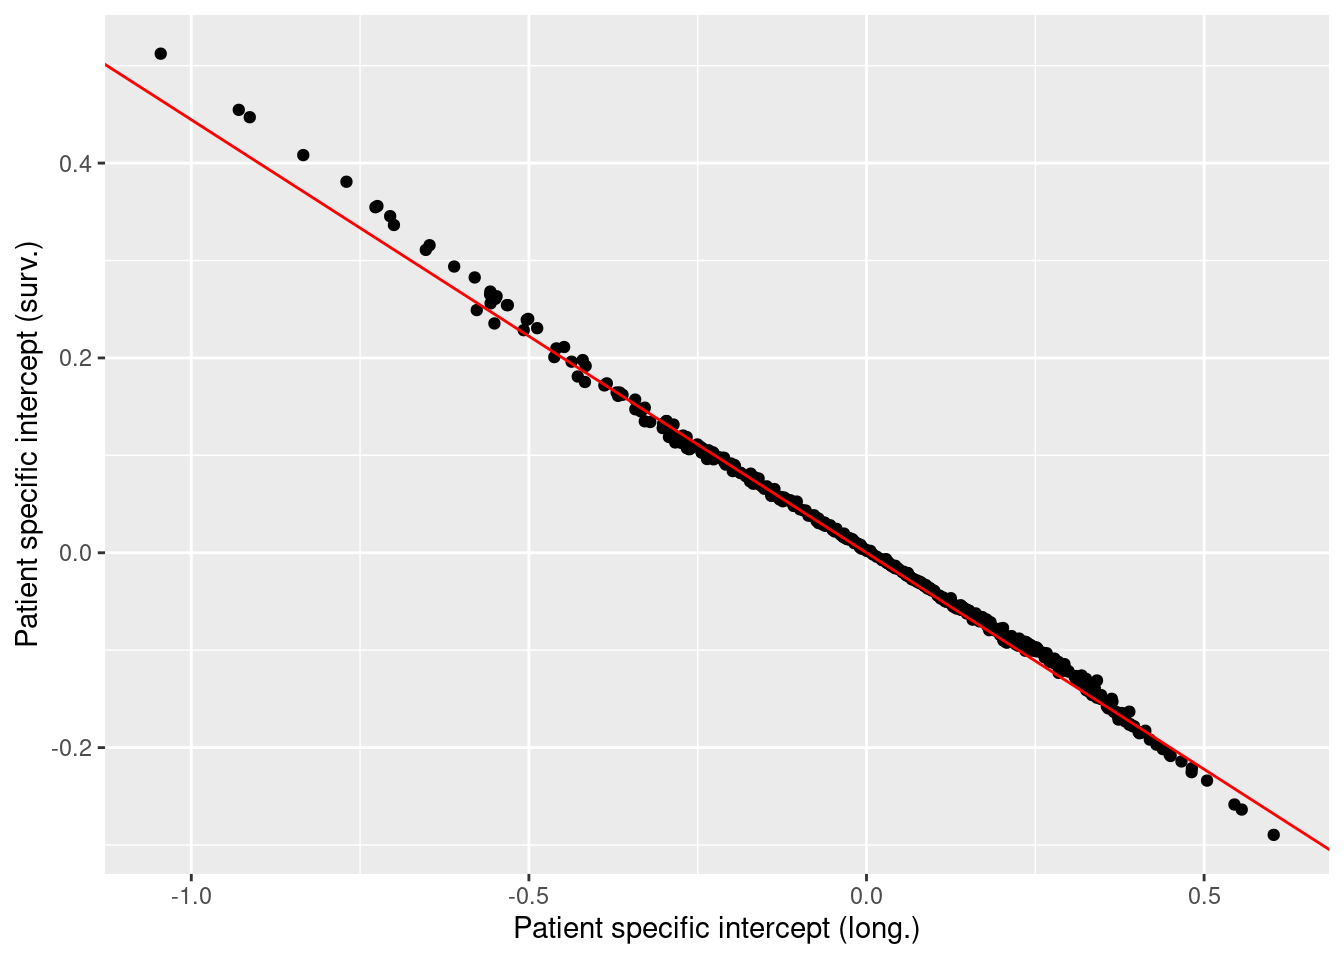 Patient specific intercept in the longitudinal models versus their copied values into the survival model. The red line represents a line with slope equal to the posterior mean of the scaling factor \(\beta_1\).